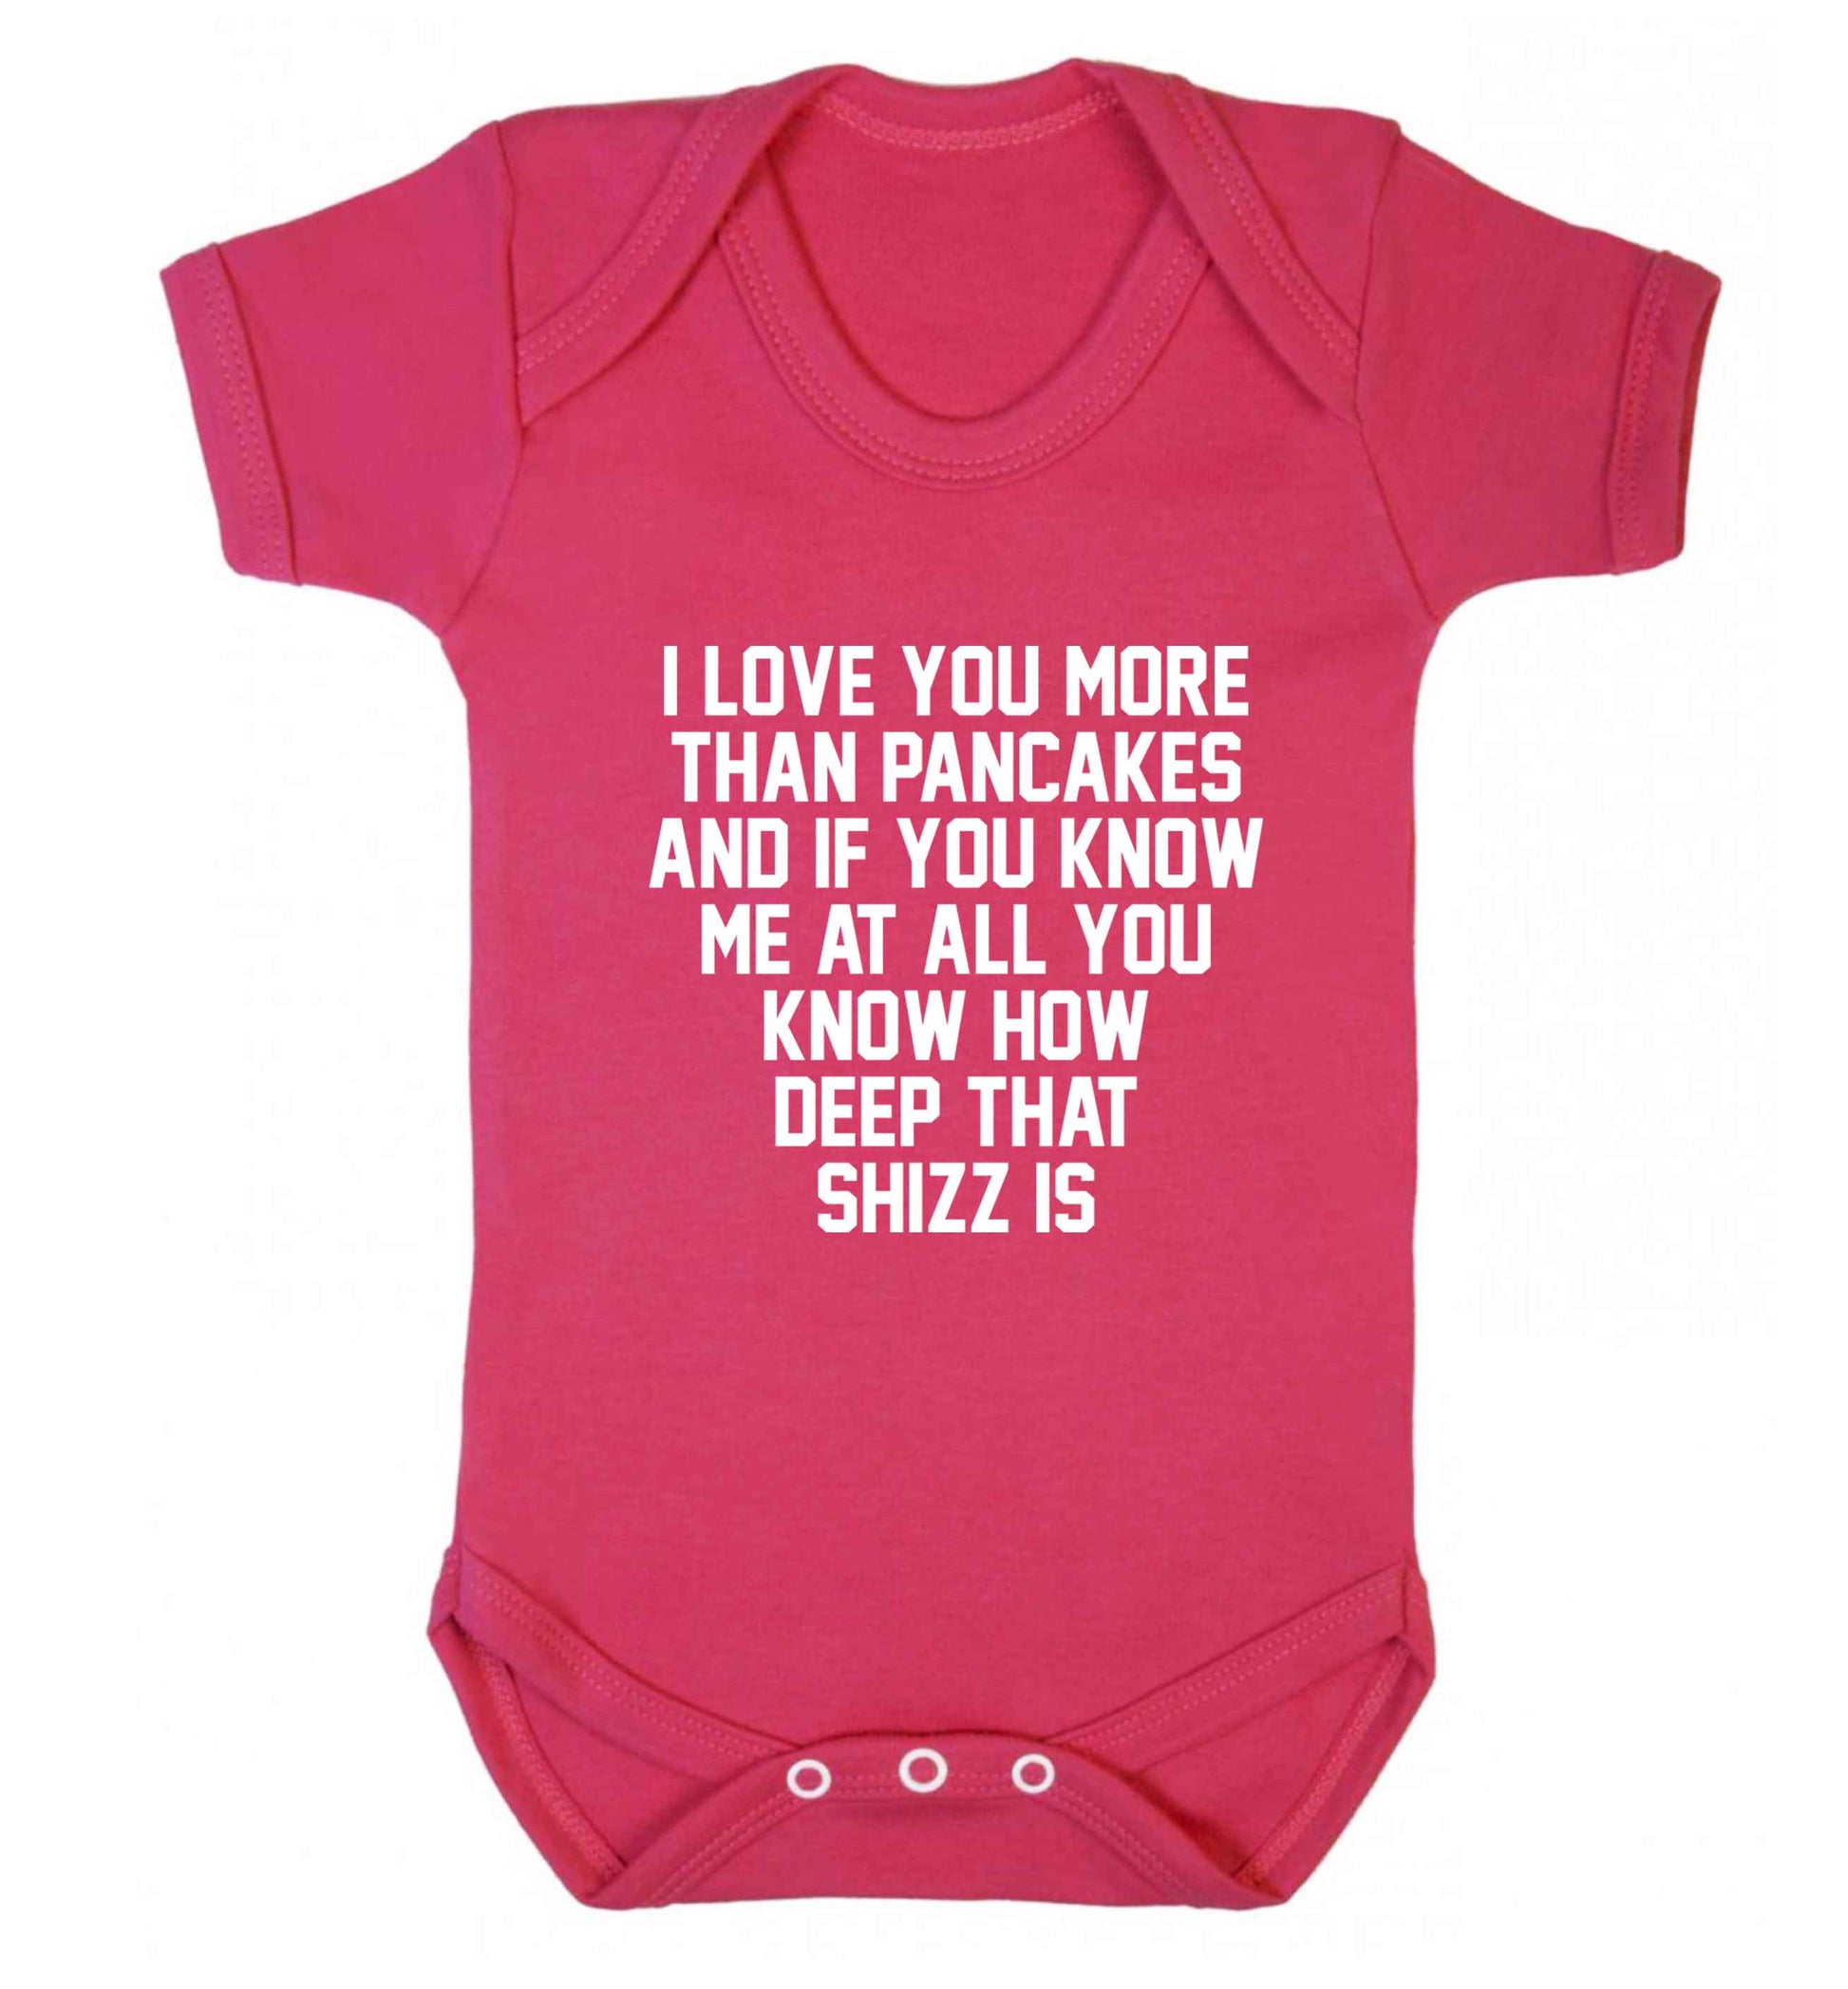 I love you more than pancakes and if you know me at all you know how deep that shizz is baby vest dark pink 18-24 months